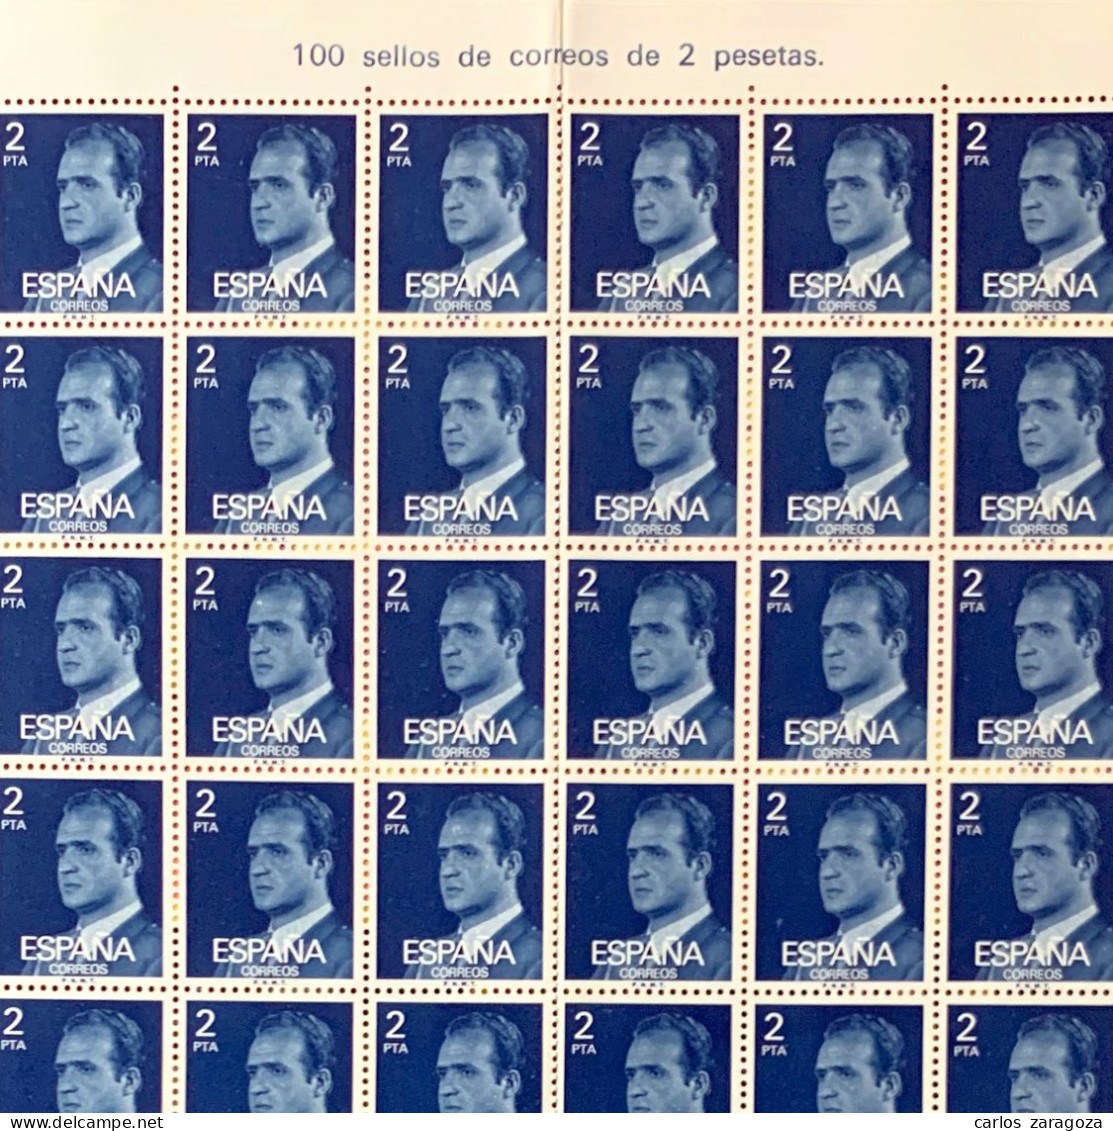 SPAIN 1976—KING JUAN CARLOS #1975—COMPLETE SHEET 100 MNH STAMPS—DEFINITIVE ISSUE—ESPAGNE Feuille Yt 1991 Timbres Neufs - Volledige Vellen